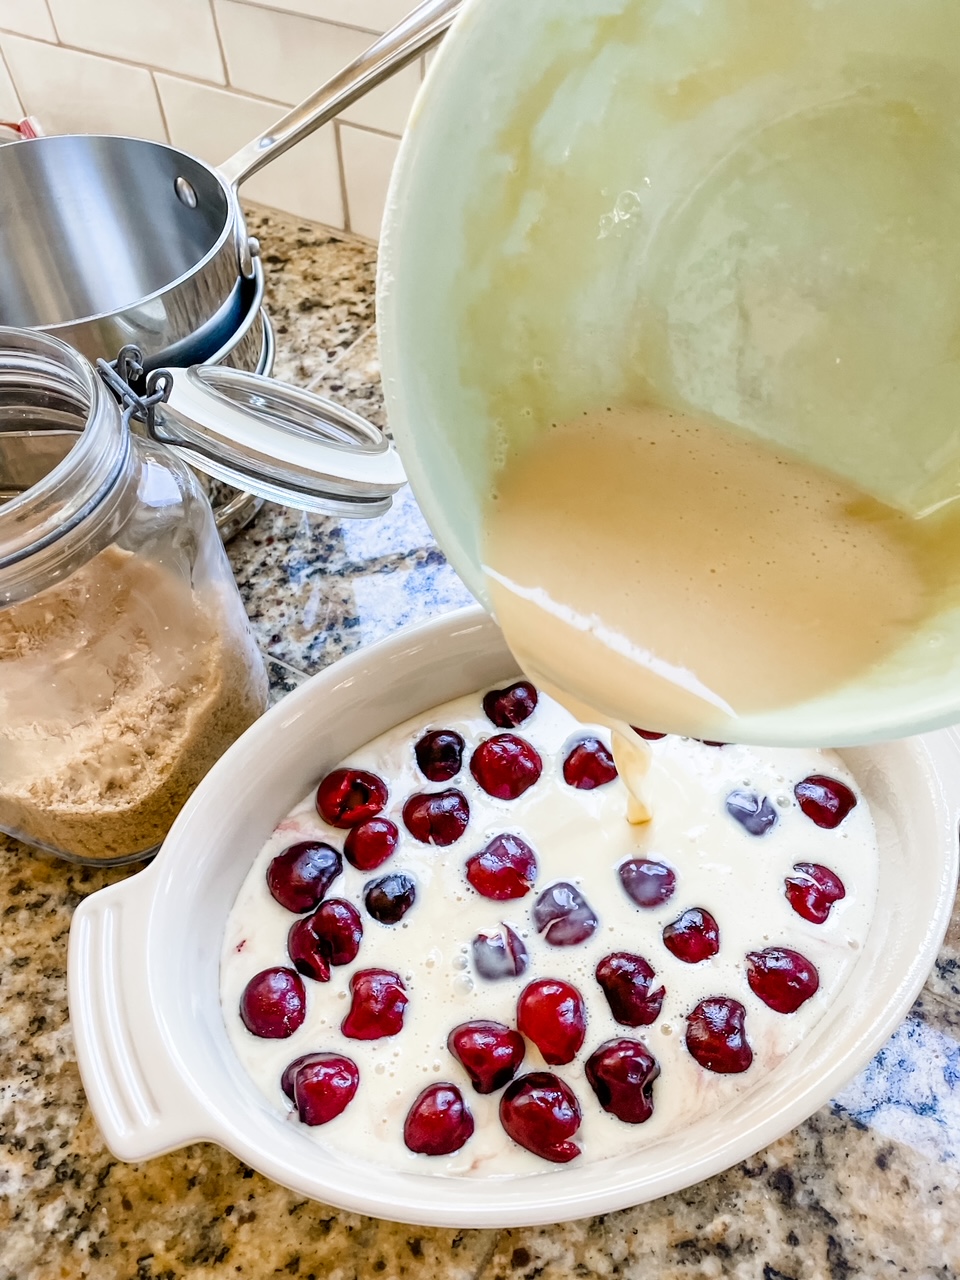 The batter being poured over the baking dish filled with cherries